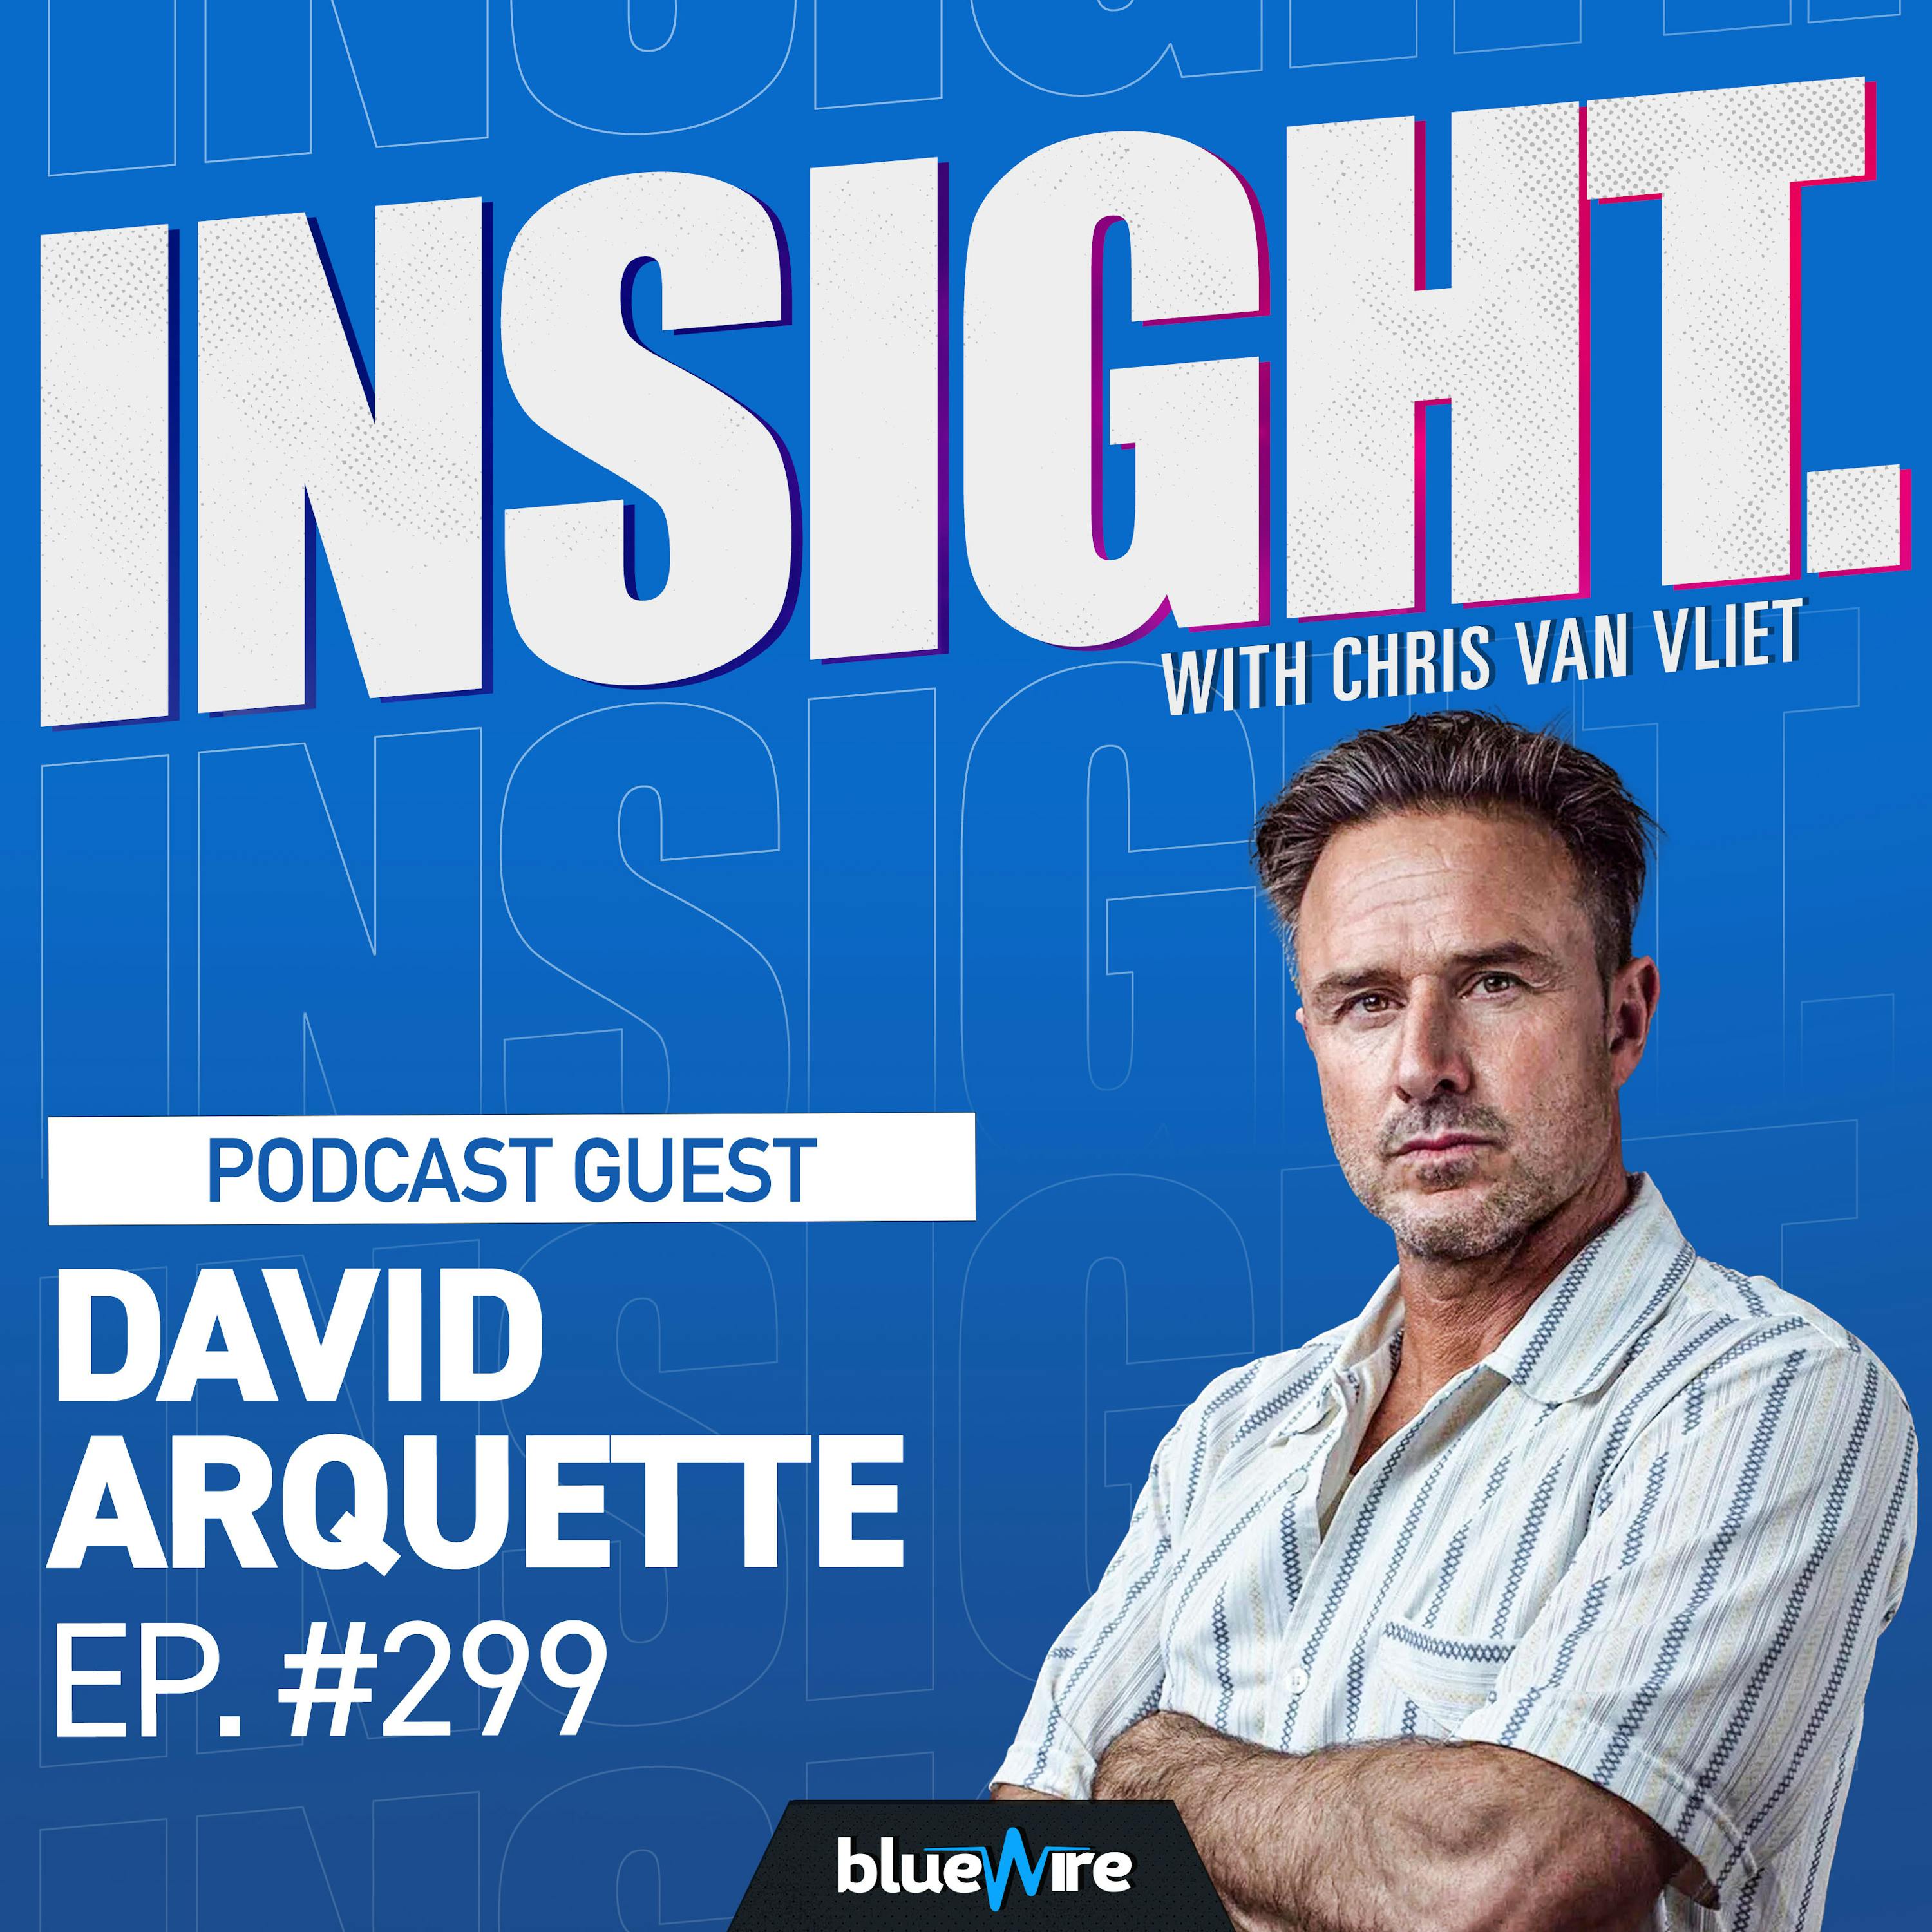 David Arquette on SCREAM, Almost Dying in a Wrestling Match, Winning the WCW Title - Interview from September 2020